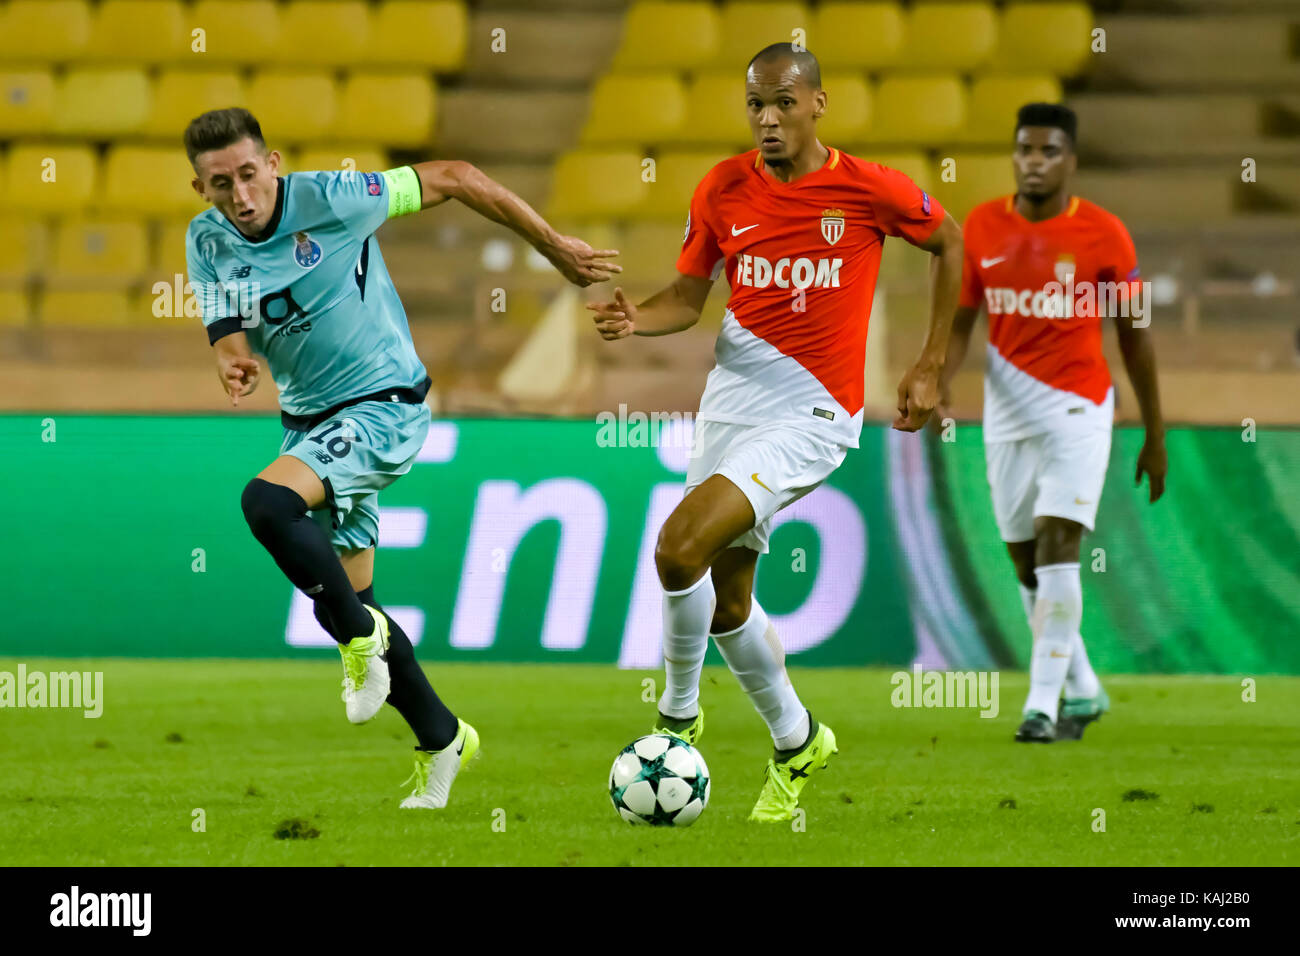 Monaco, France. 26th Sep, 2017. Fabinho (R) (AS Monaco) - Hector Herrera (L) (FC Porto) during the Champions League Group Match between AS Monaco and FC Porto in the Stade Louis II in Monaco, 26 September 2017 Credit: Norbert Scanella/Alamy Live News Stock Photo